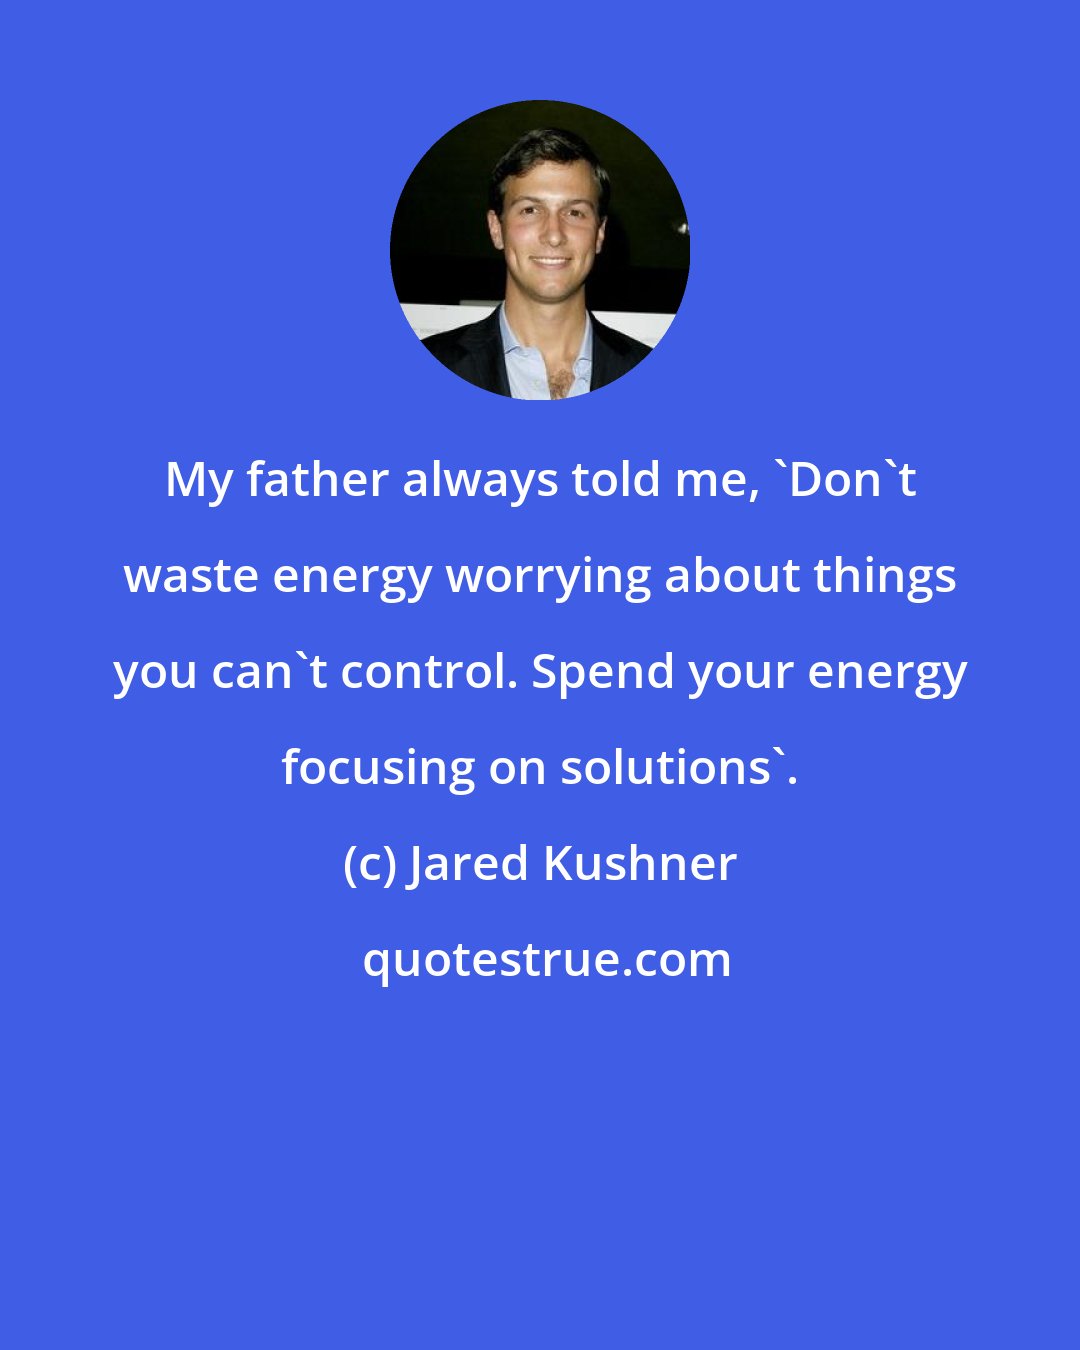 Jared Kushner: My father always told me, 'Don't waste energy worrying about things you can't control. Spend your energy focusing on solutions'.